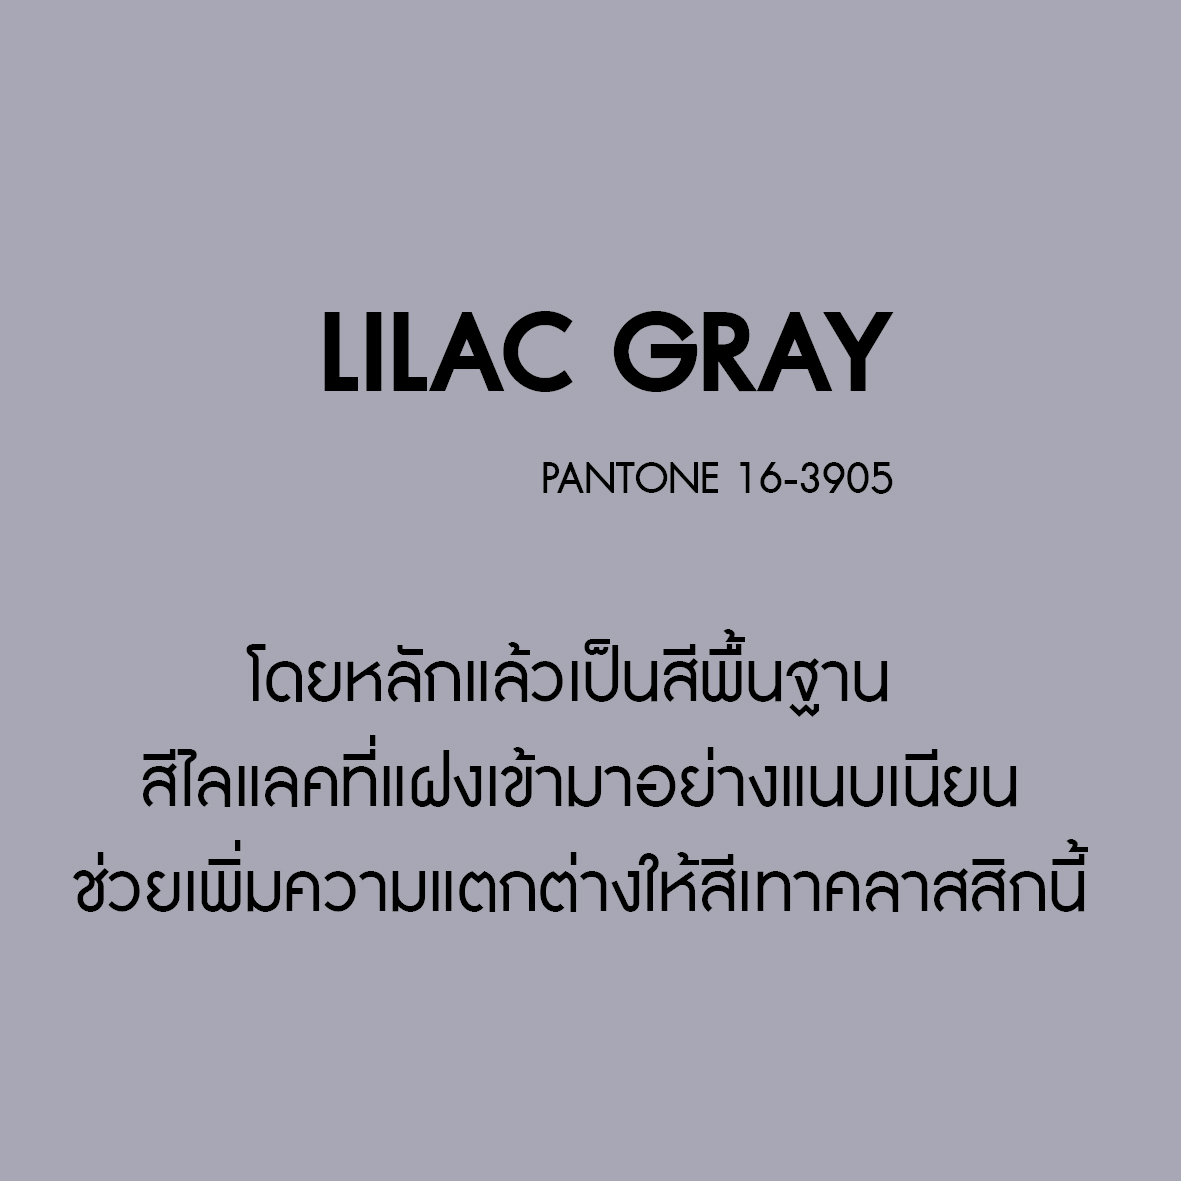 LilacGray